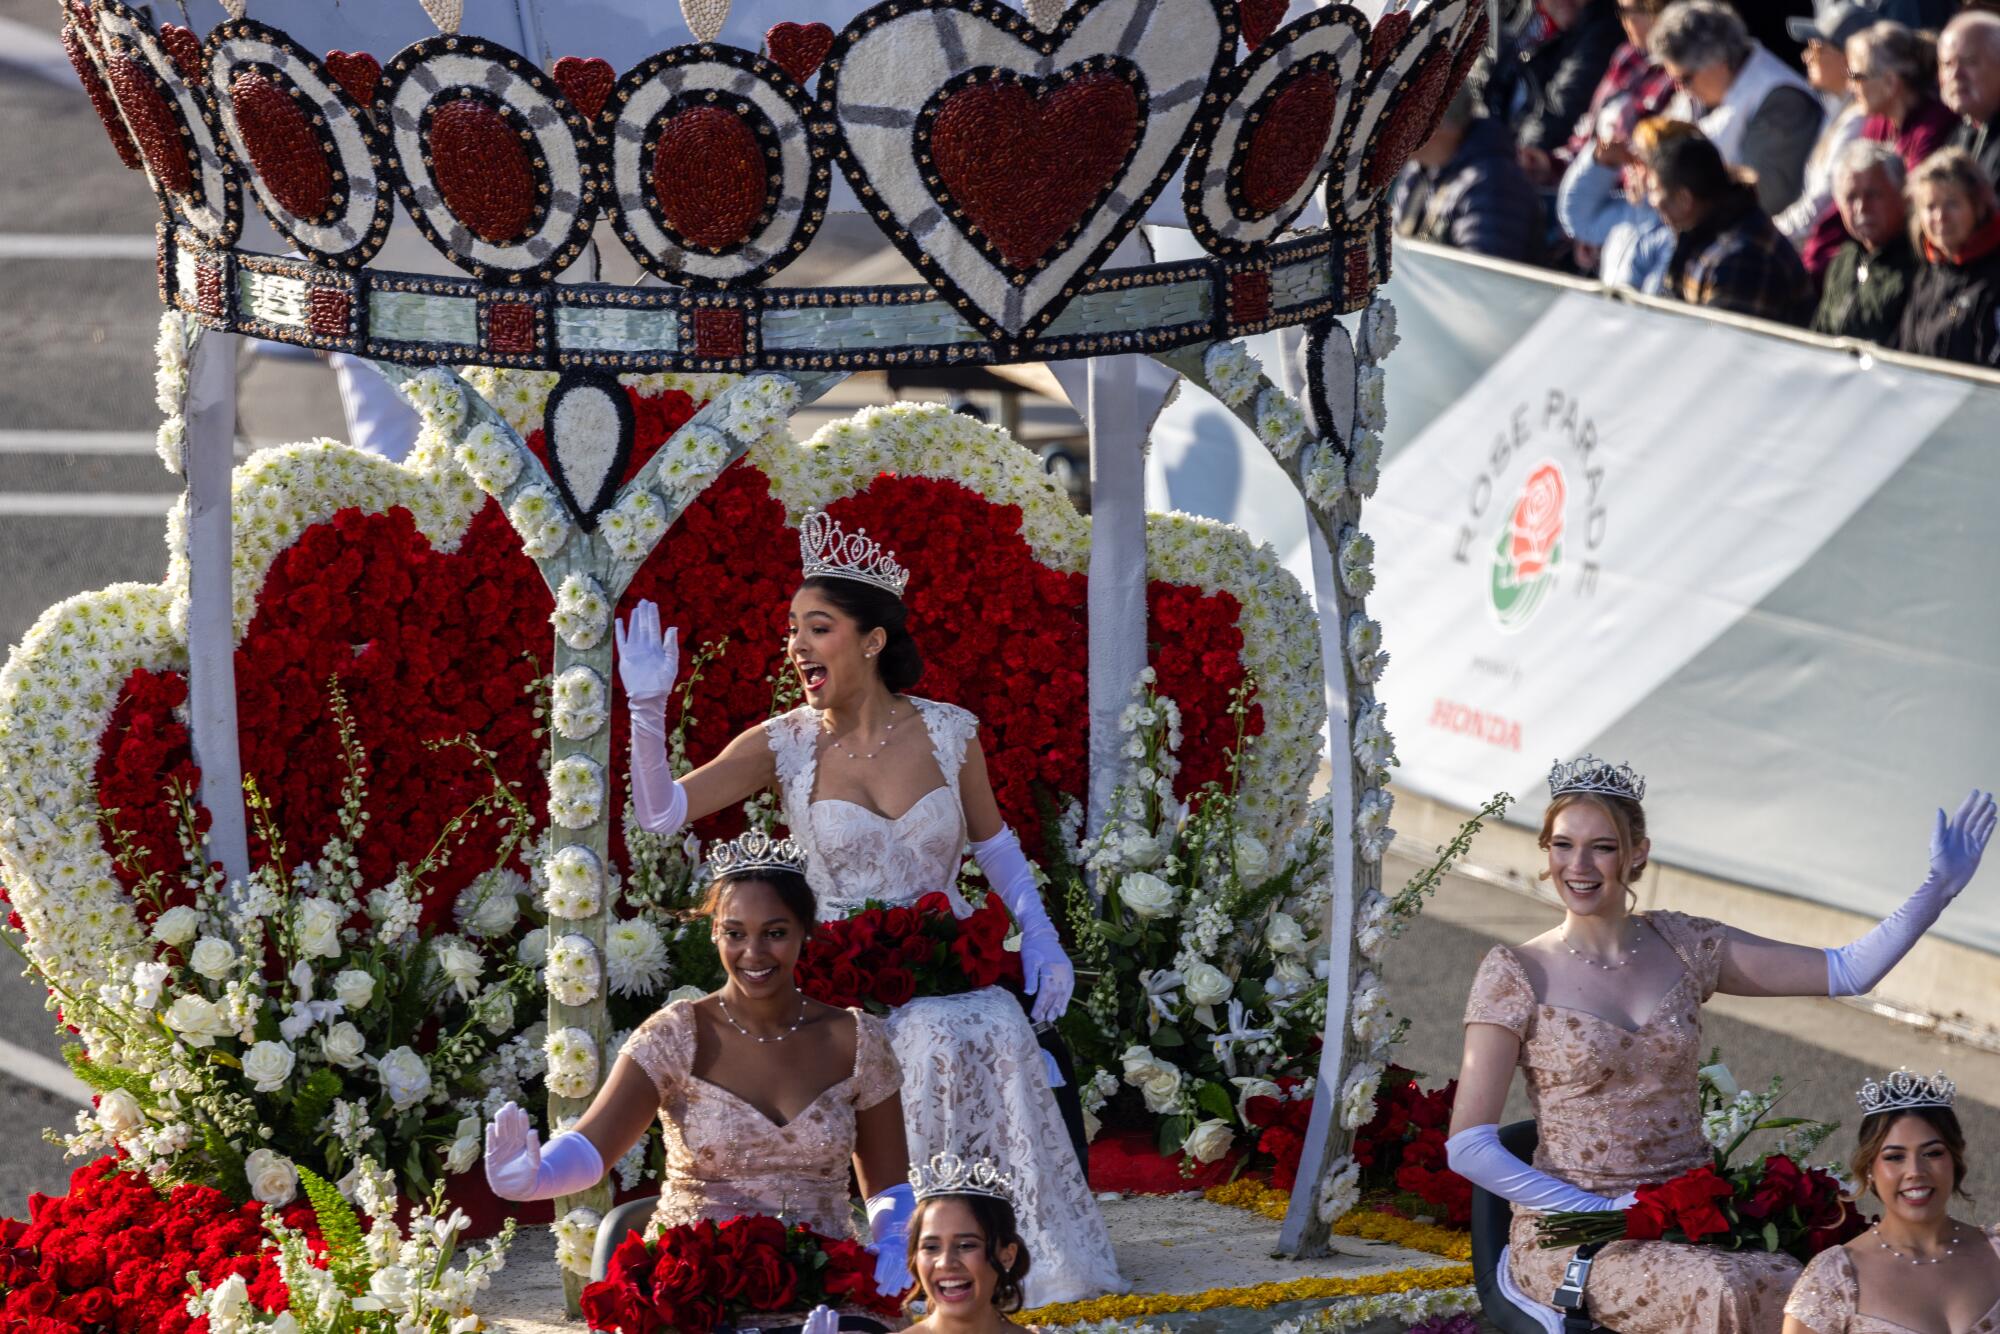 Rose Queen Naomi Stillitano and members of her court wave in the Rose Parade.